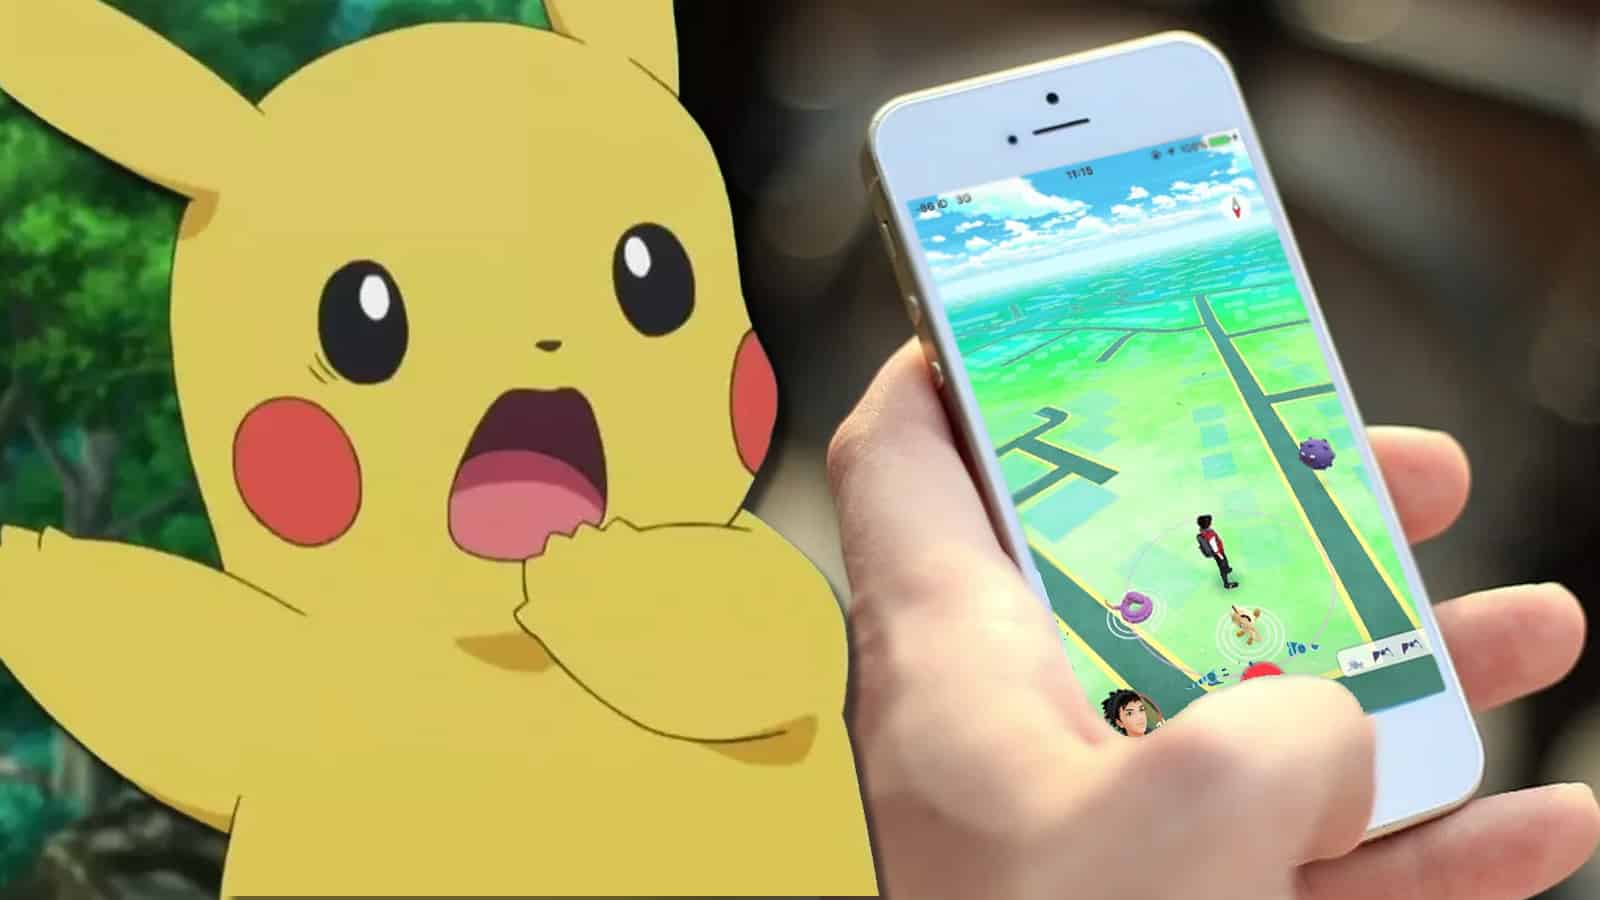 Pokemon Go trainer has been playing so much it burnt iPhone screen